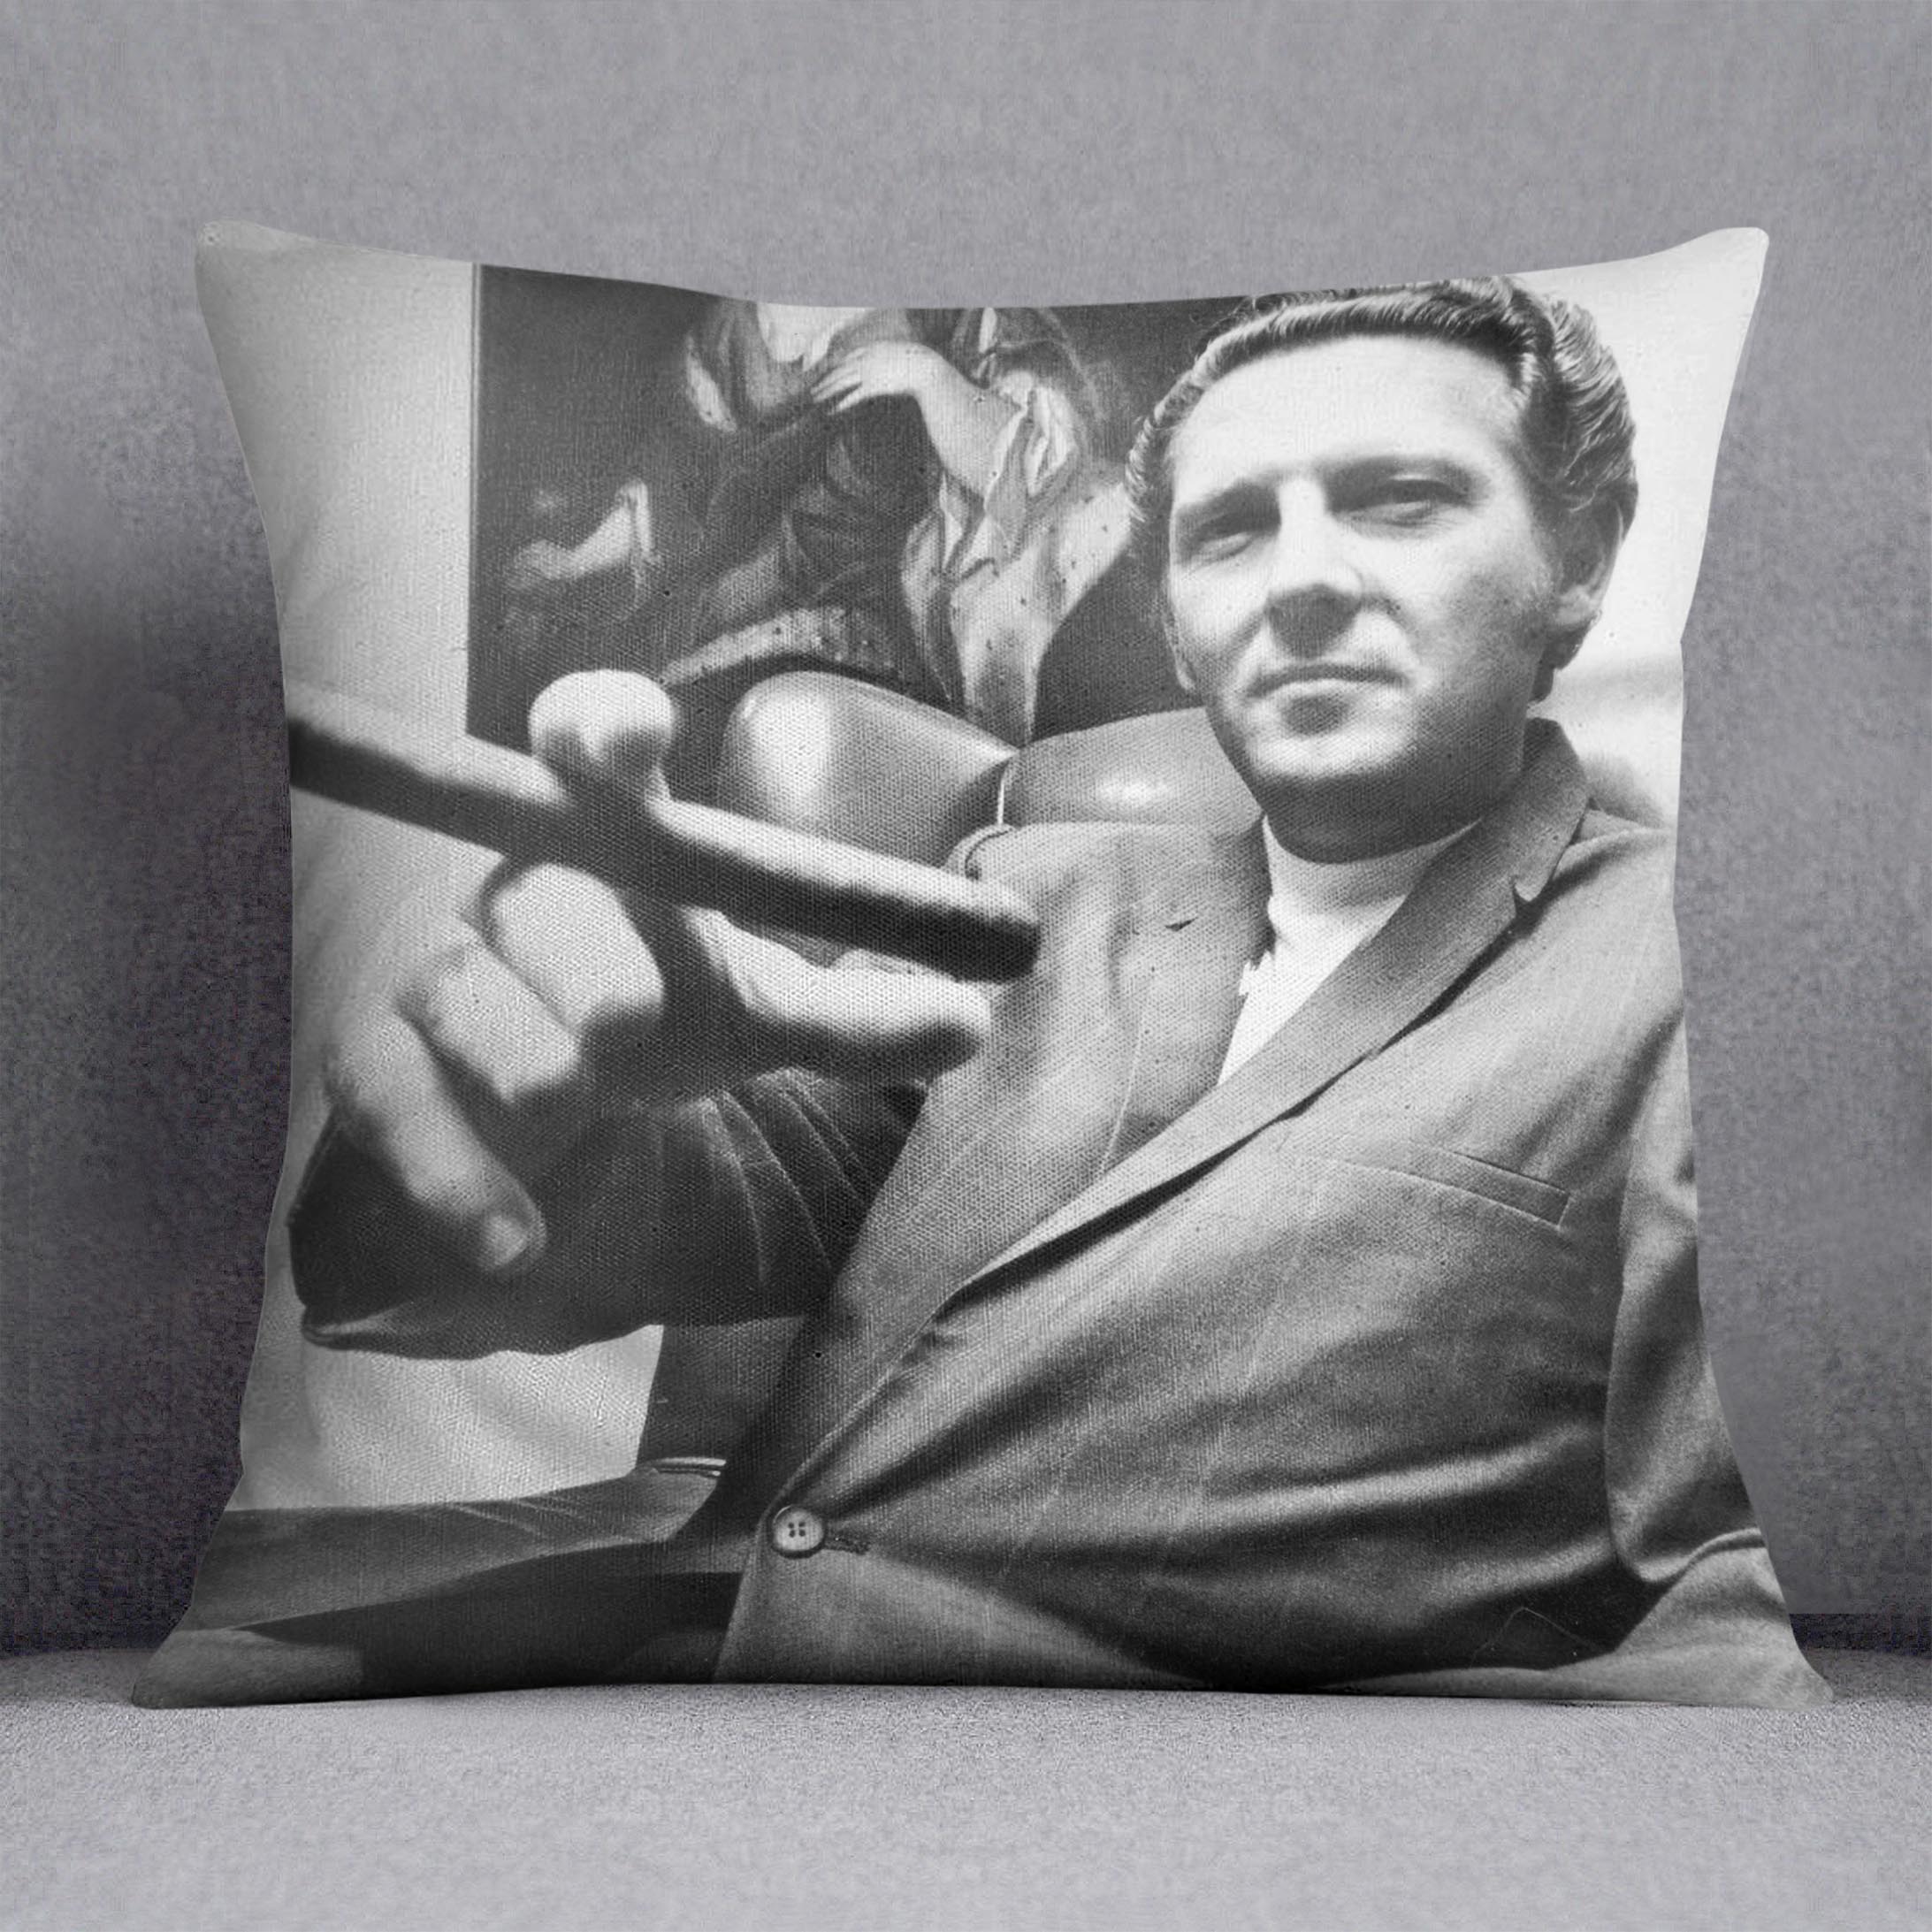 Jerry Lee Lewis in 1968 Cushion - Canvas Art Rocks - 1